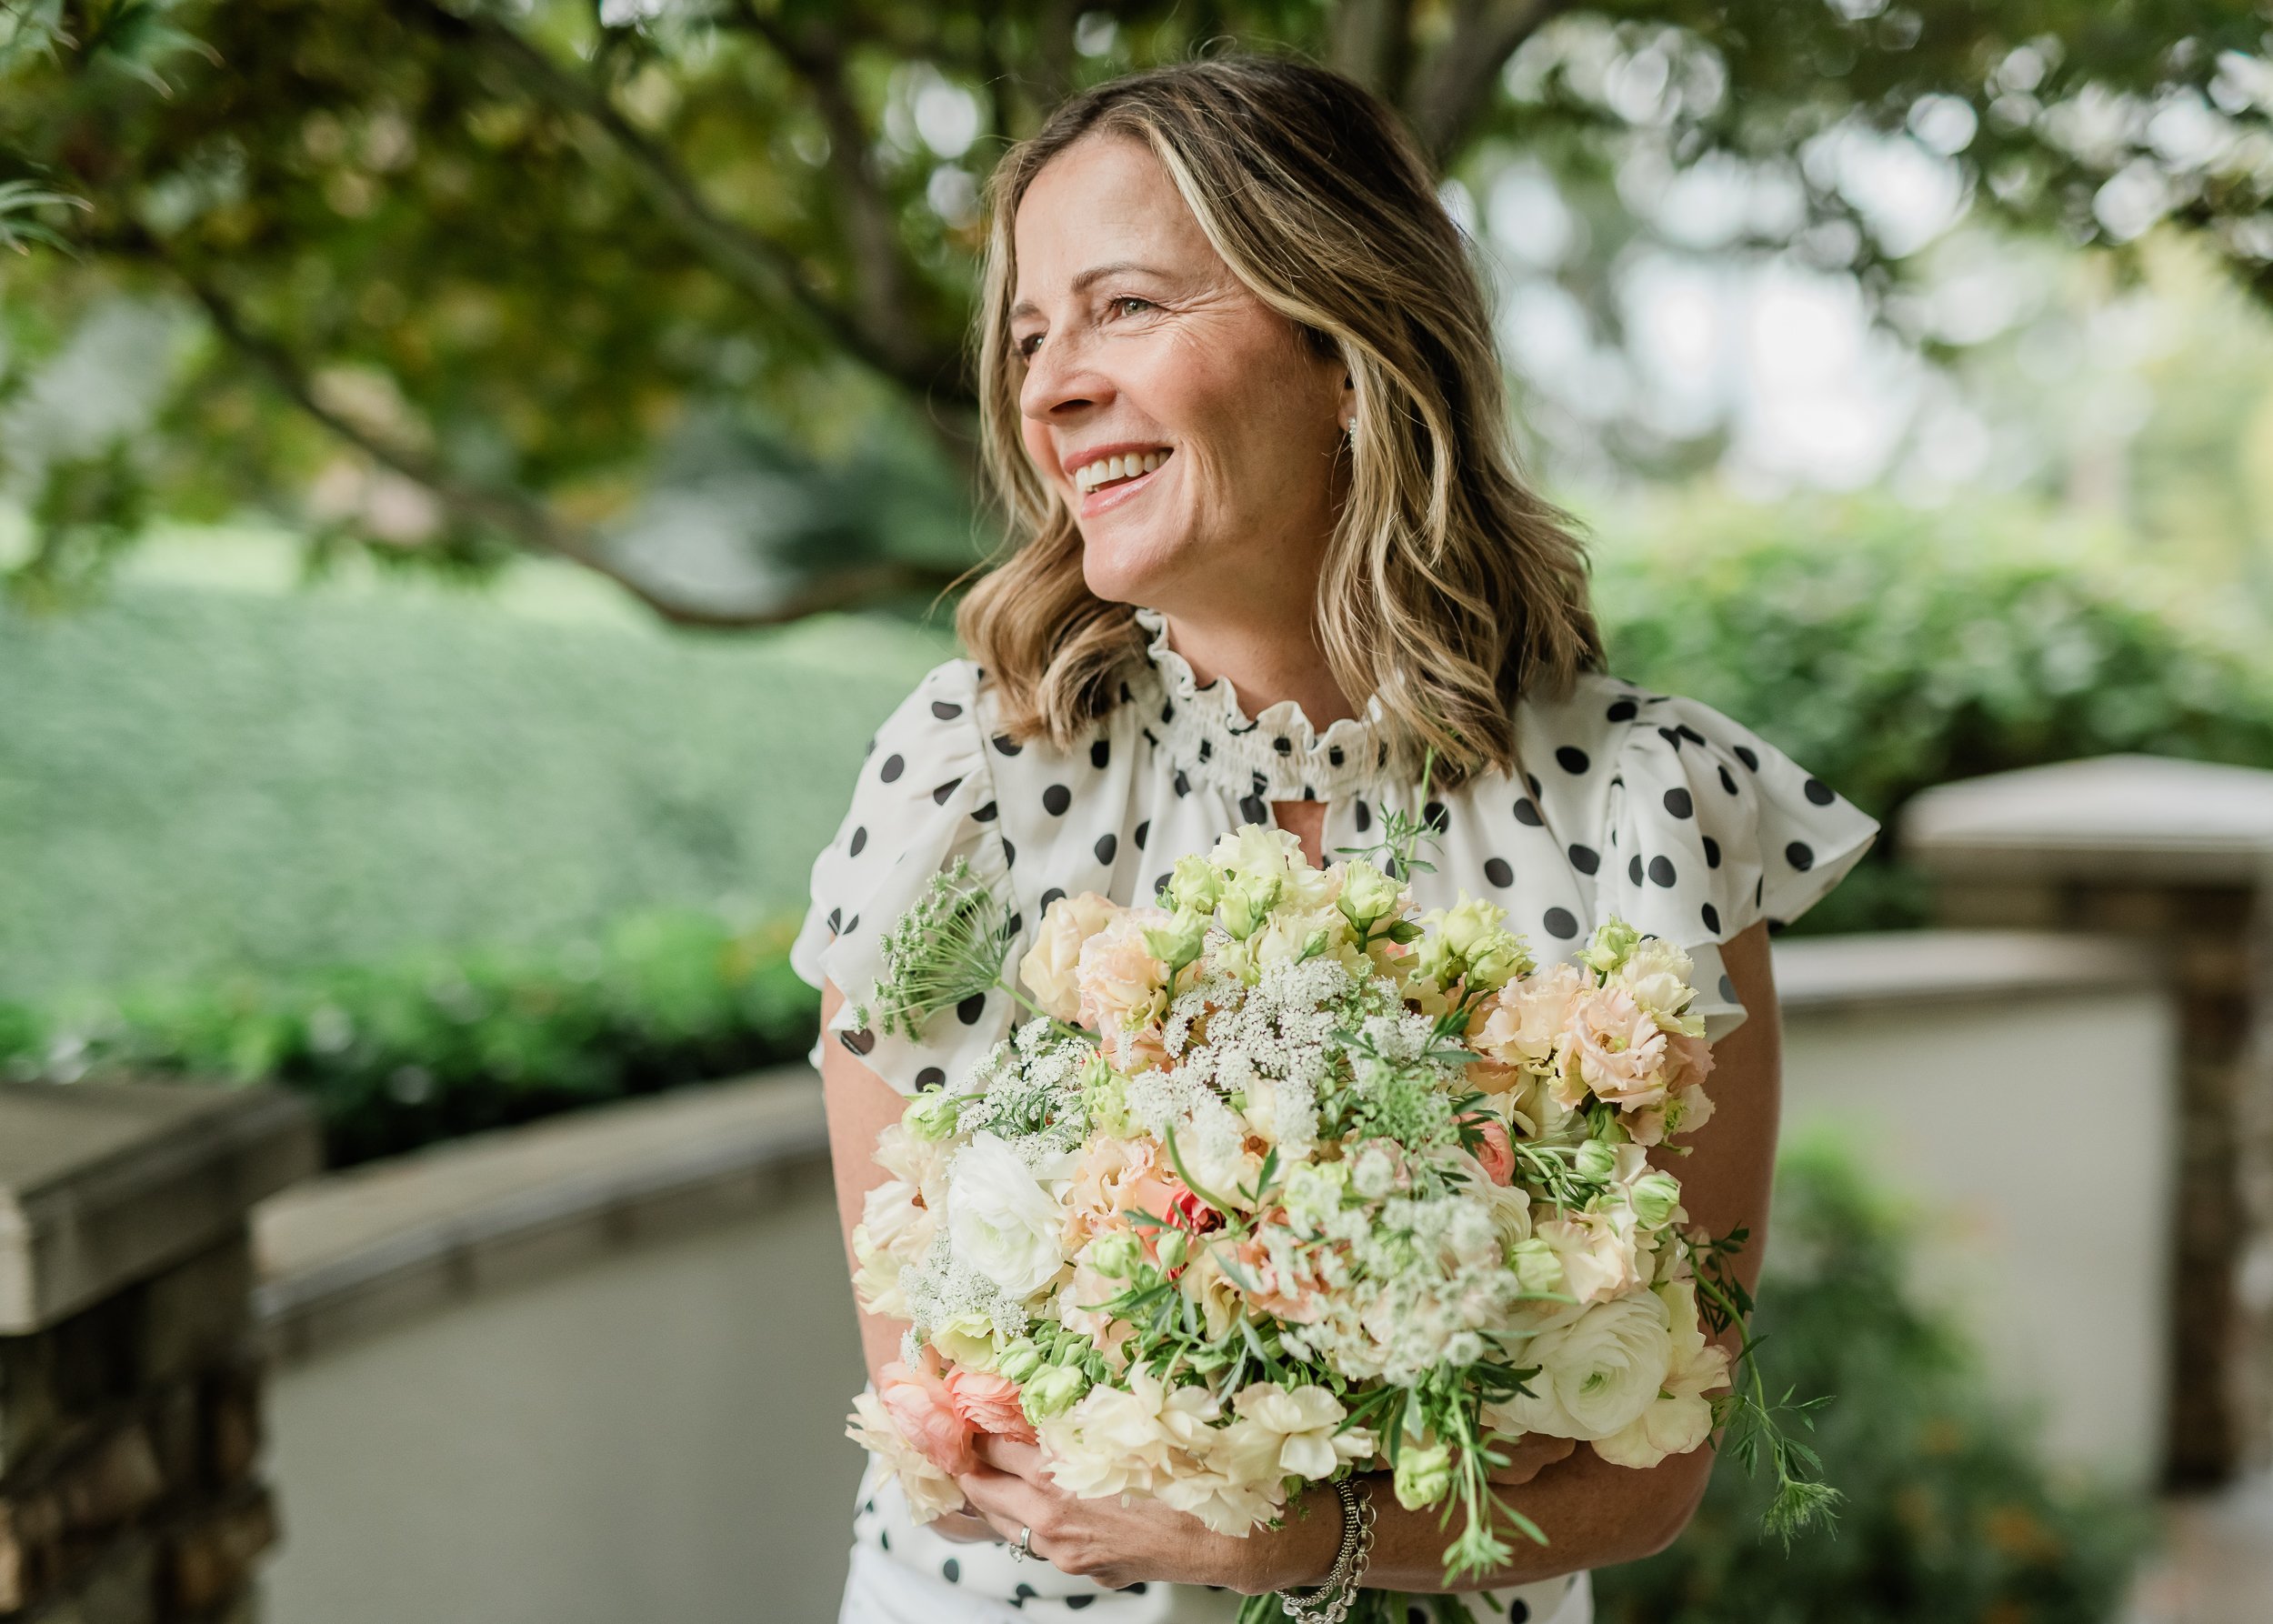  Florist looks into sunshine while holding her freshly made bouquet. 